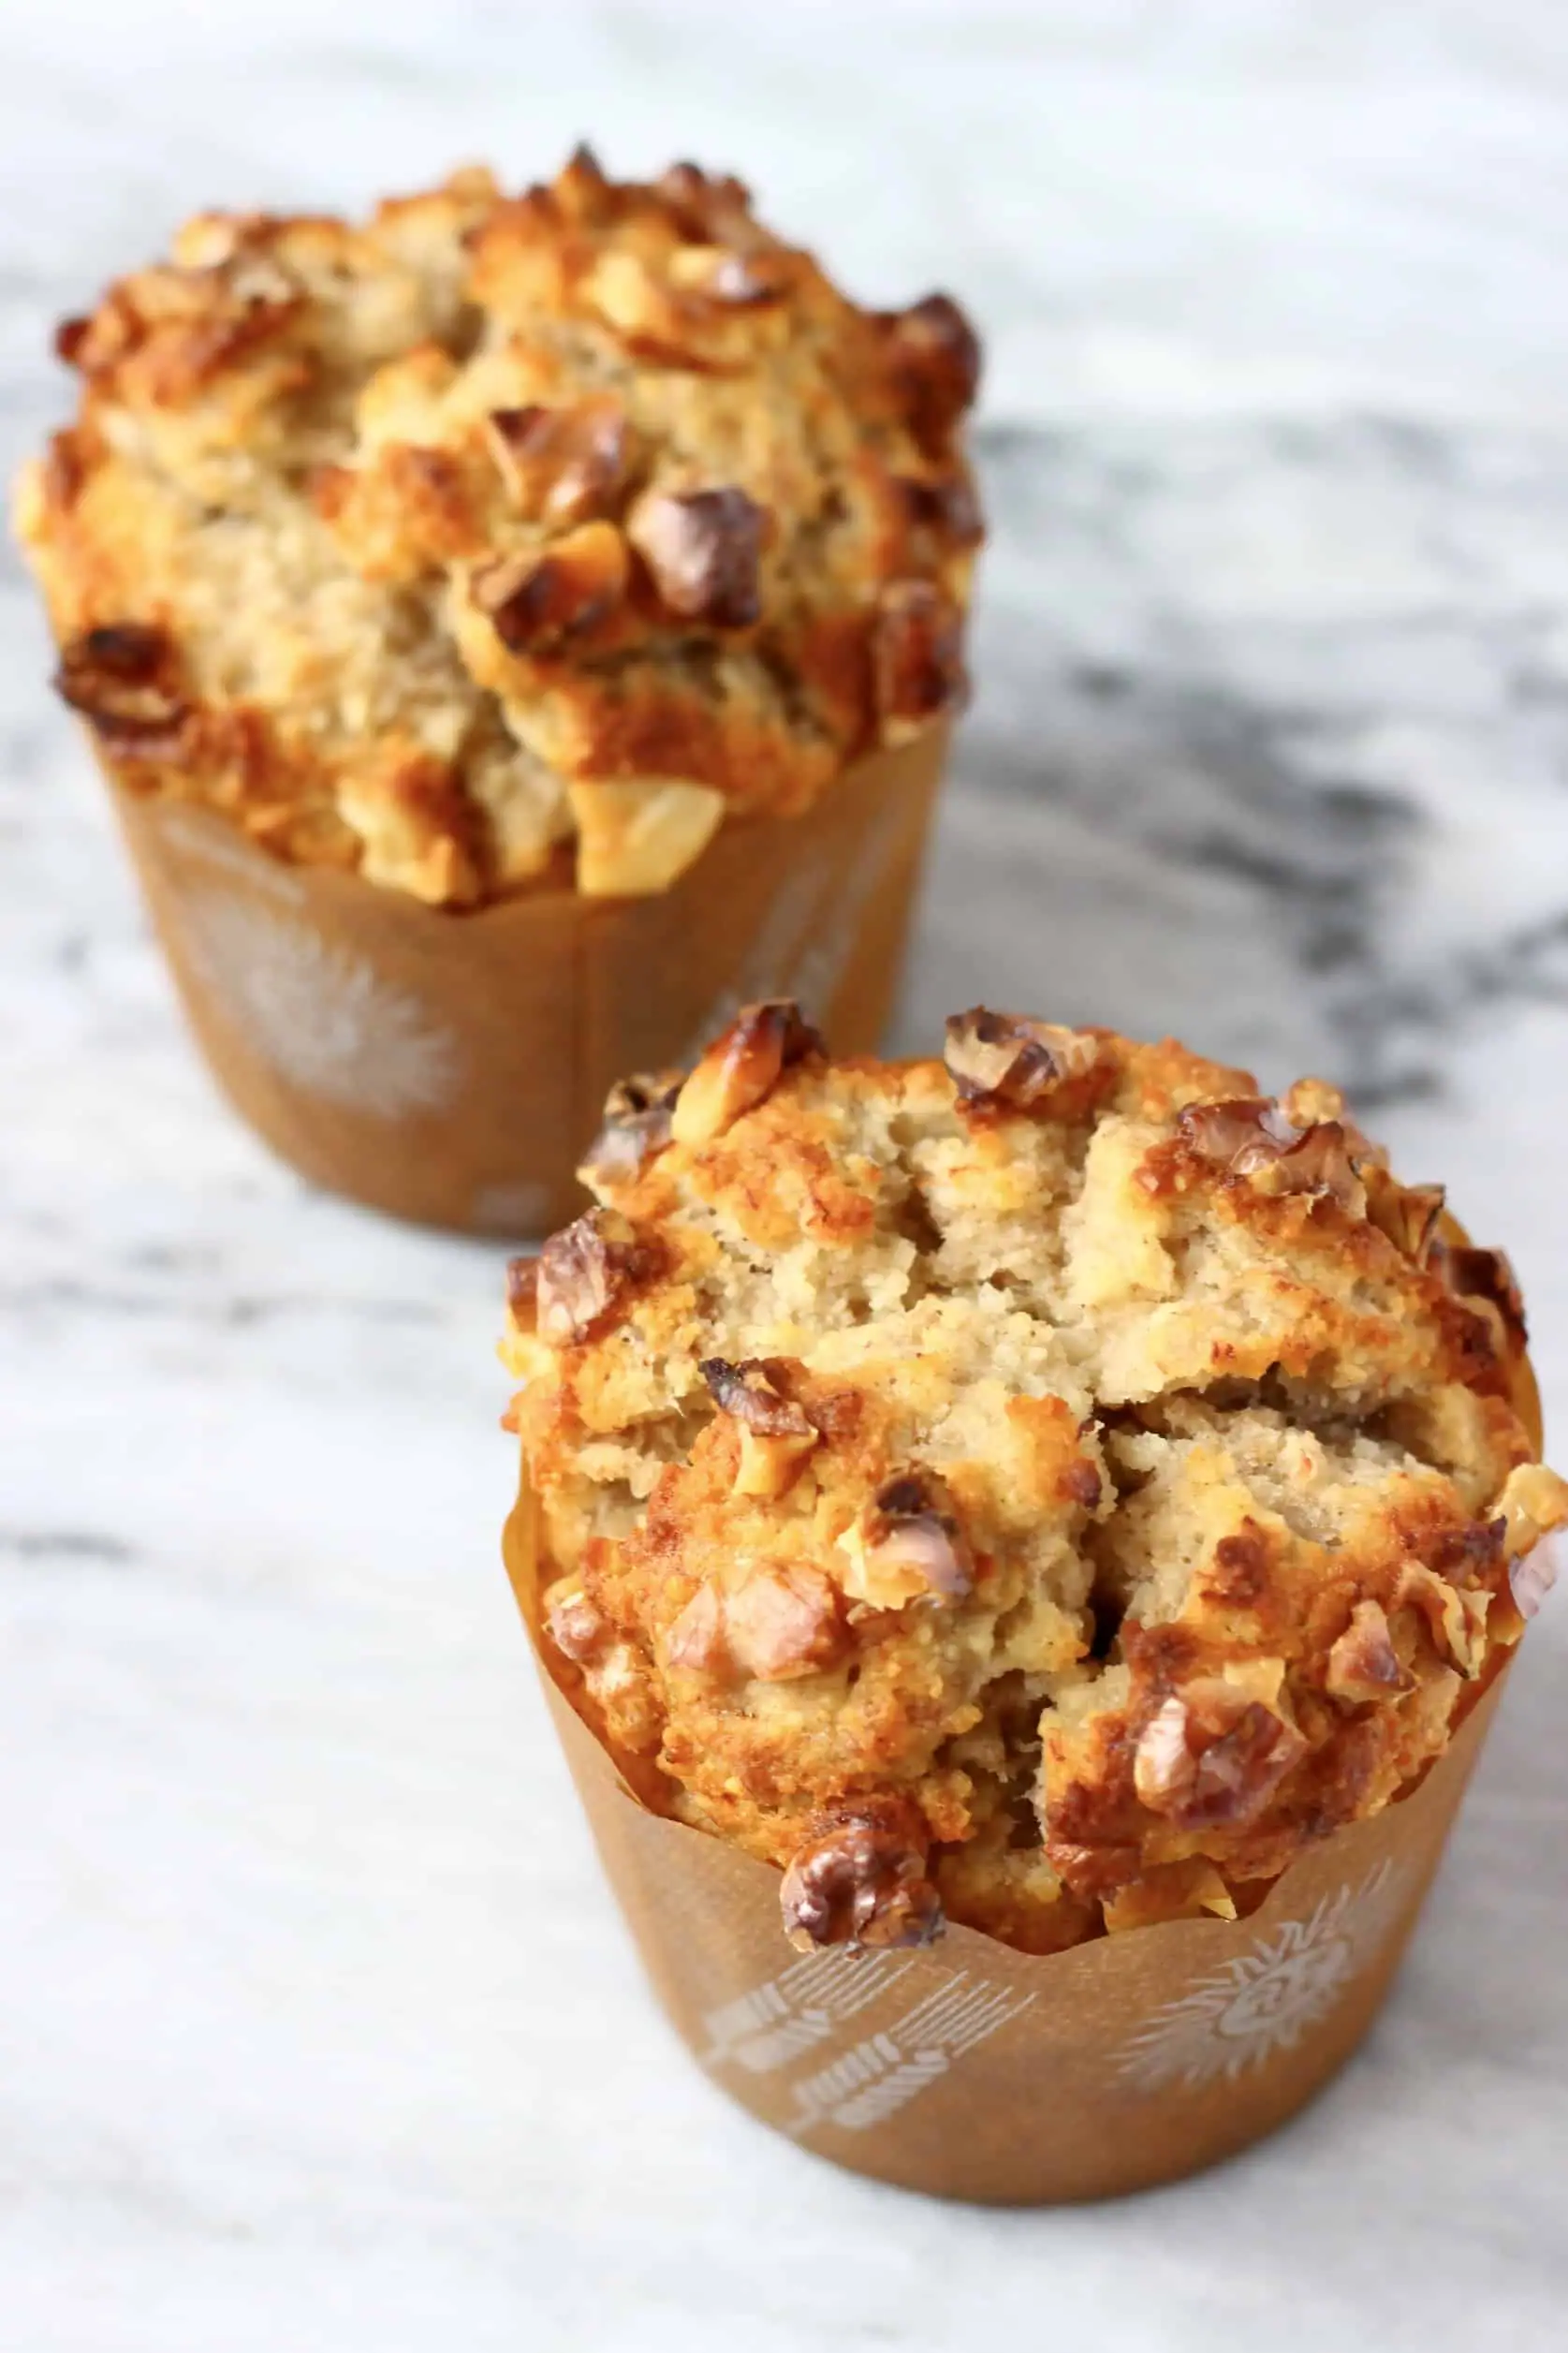 Two gluten-free vegan banana muffins topped with chopped walnuts in brown muffin cases